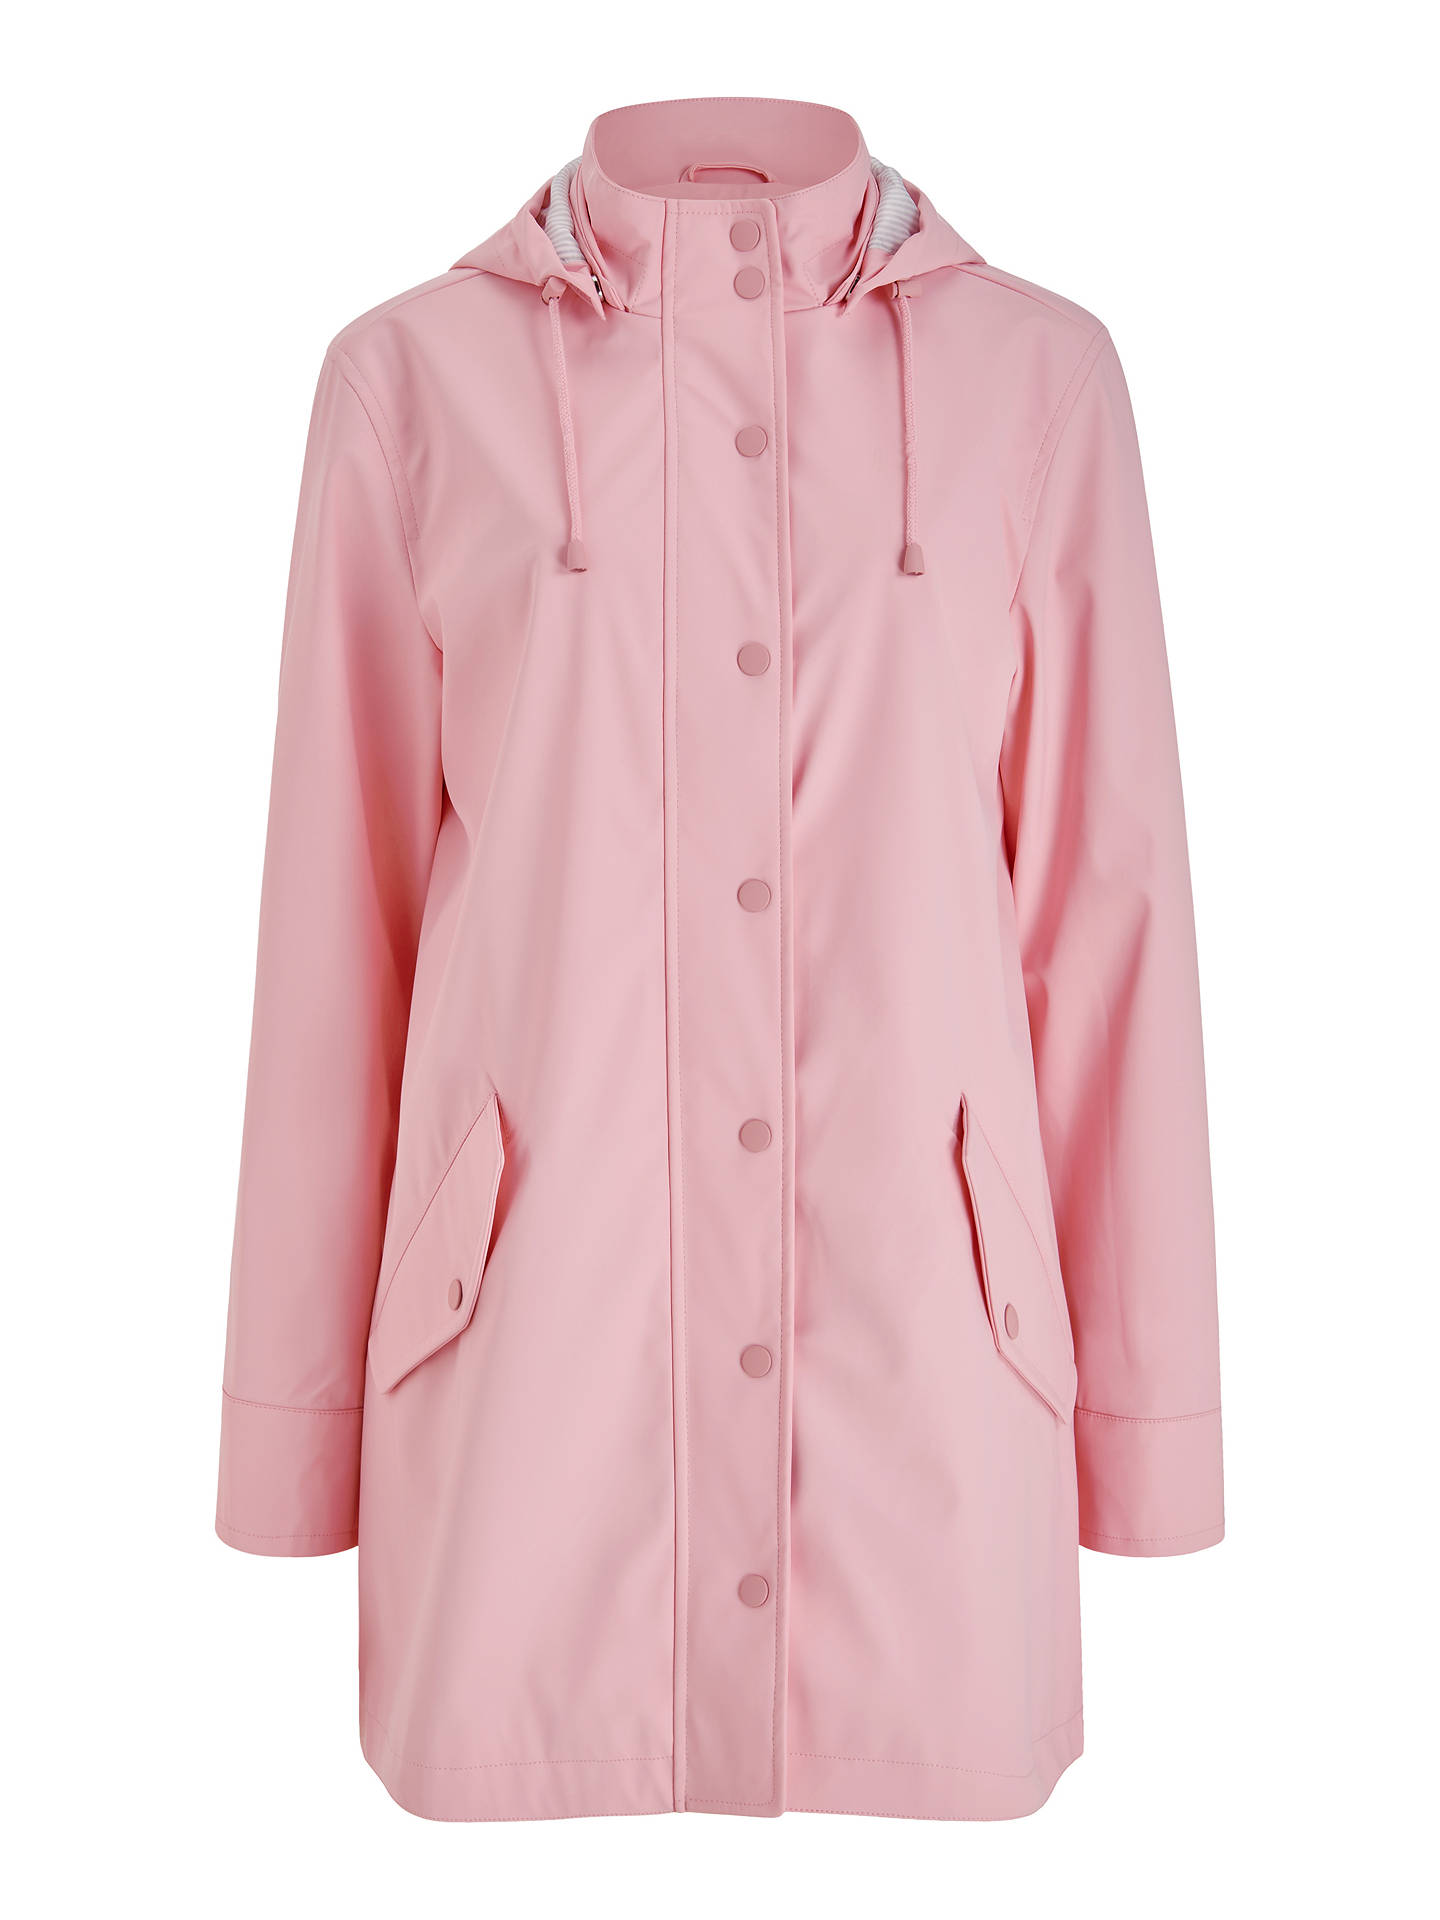 Collection WEEKEND by John Lewis Hooded Raincoat at John Lewis & Partners